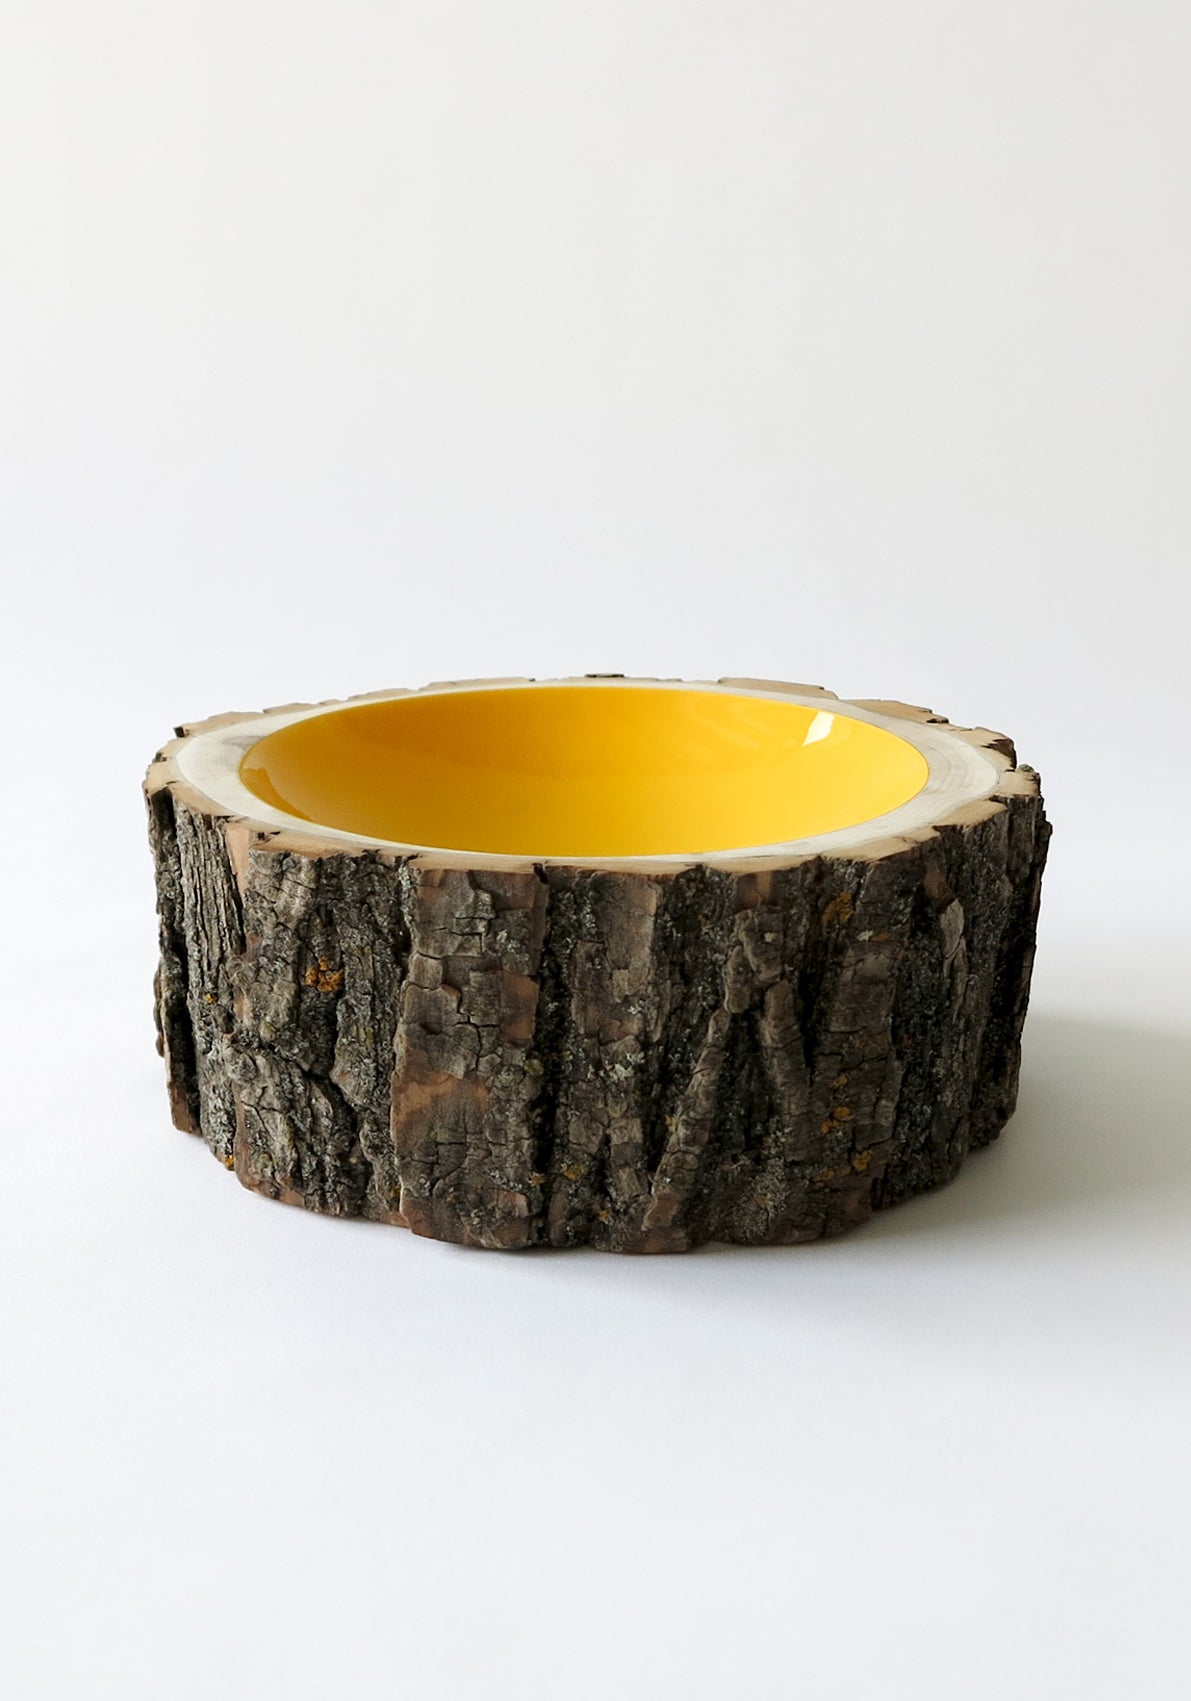 Size 10 Log Bowl - Large Wooden Bowl with rough bark, glossy interior is Lemon yellow.